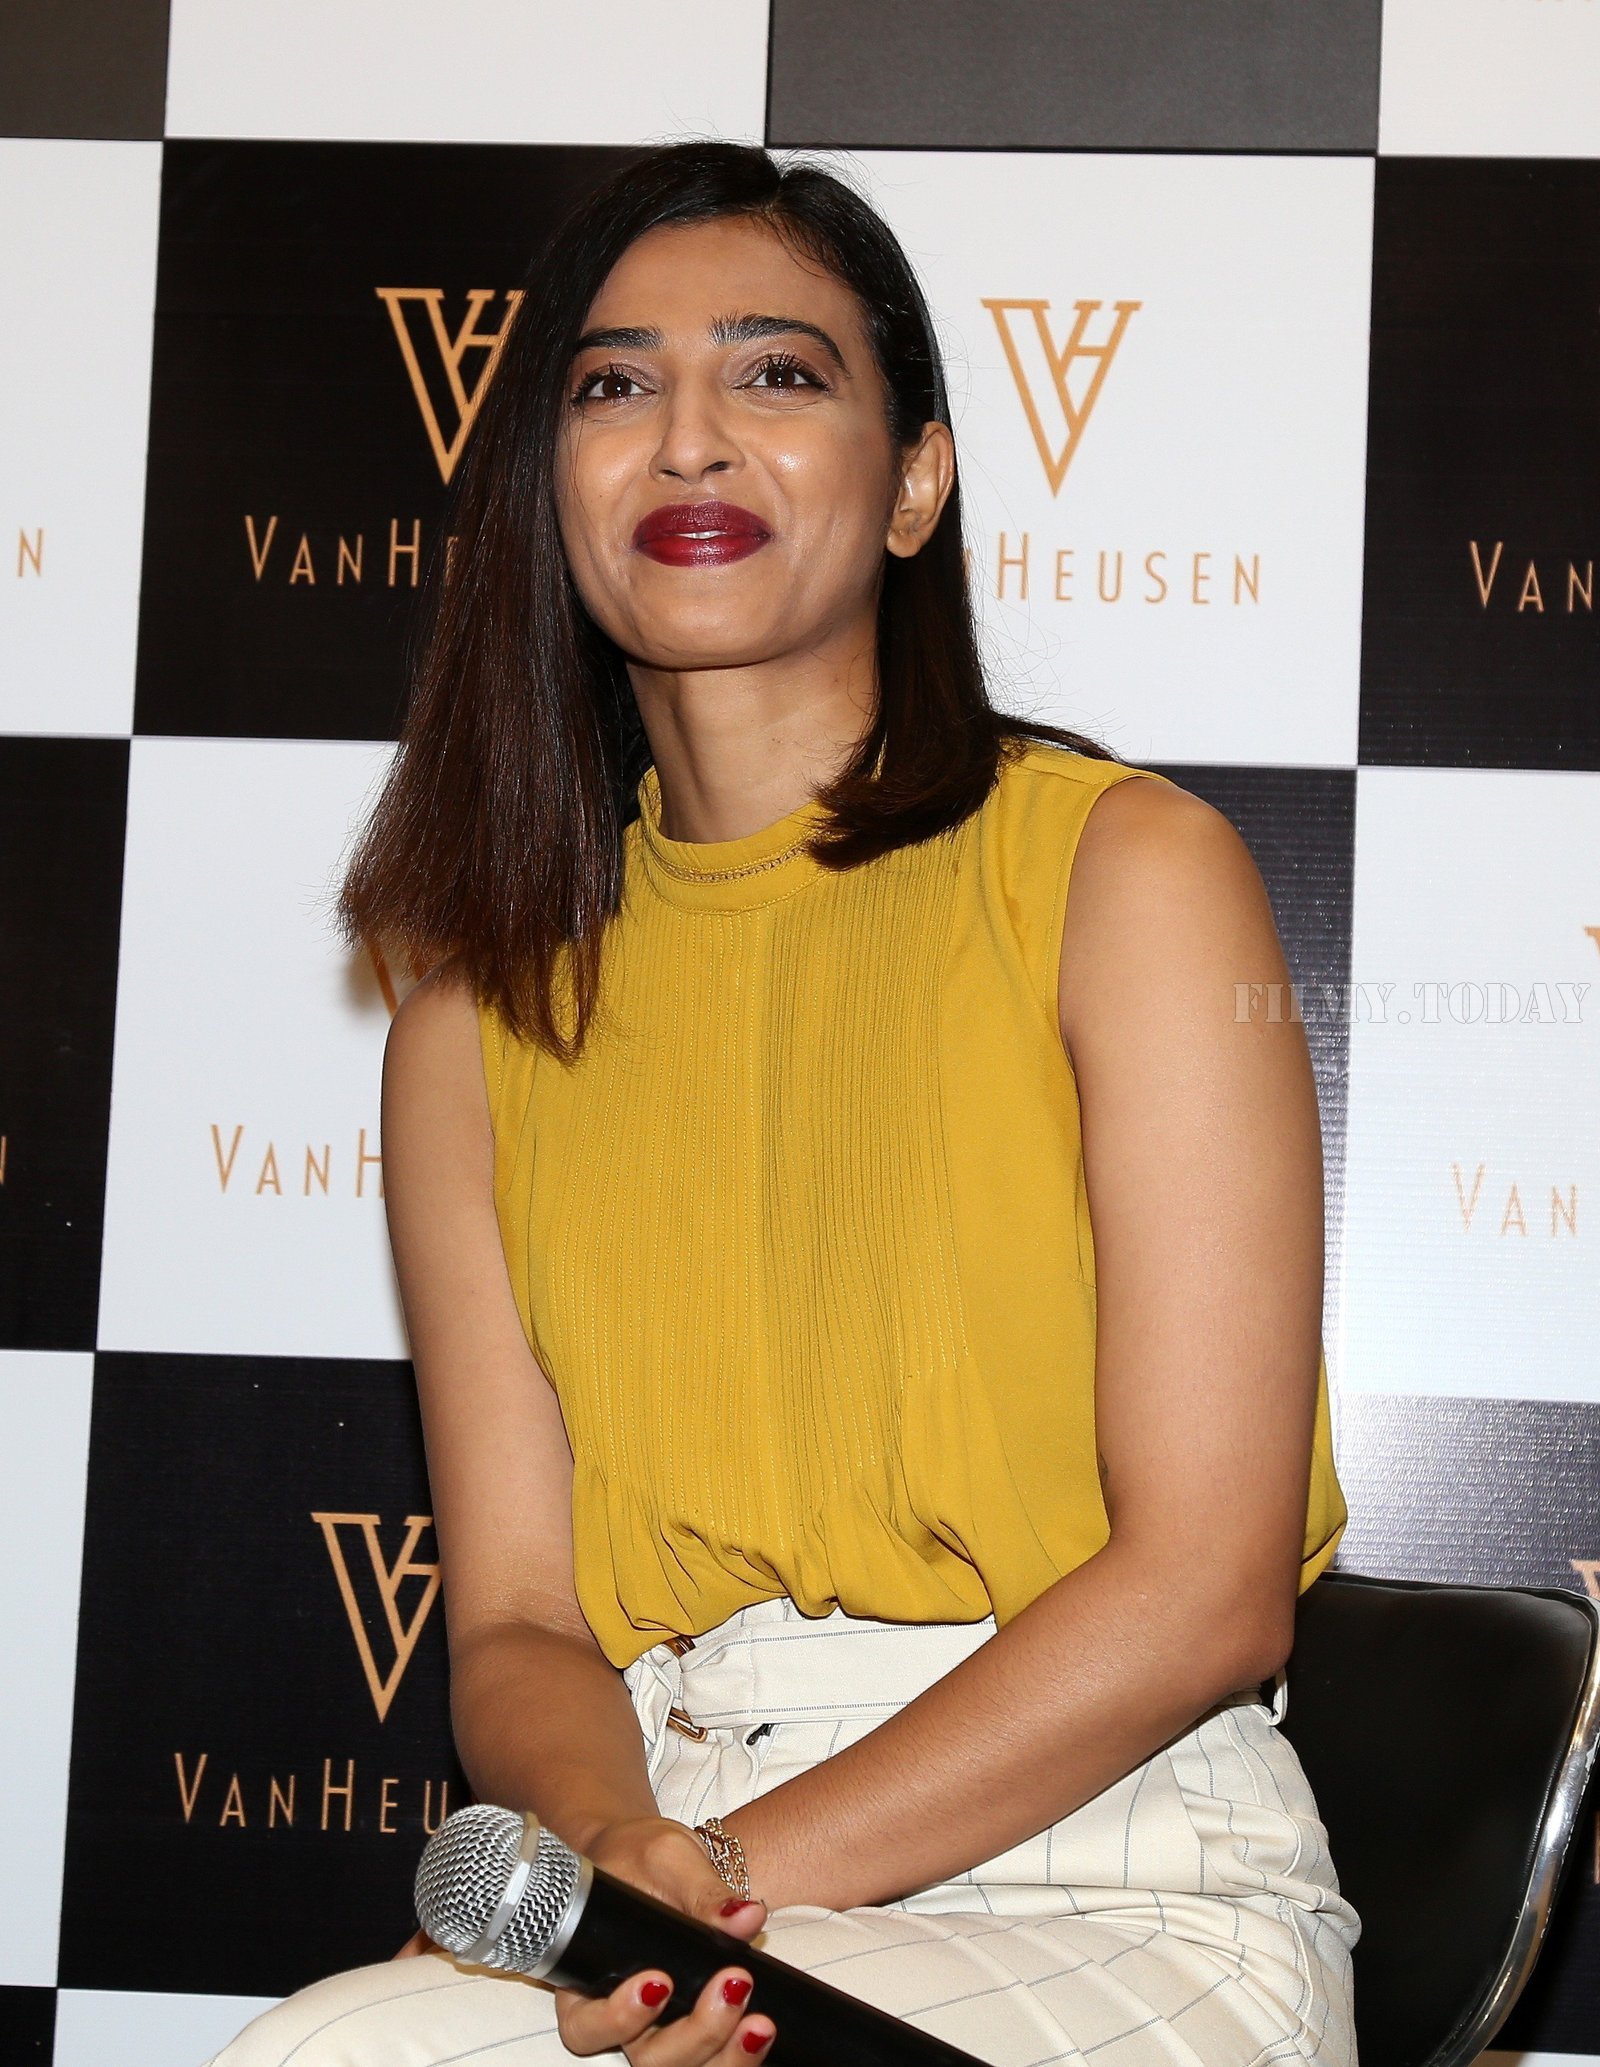 Photos: Radhika Apte At The Launch Of Van Heusen Store in Bandra | Picture 1646868